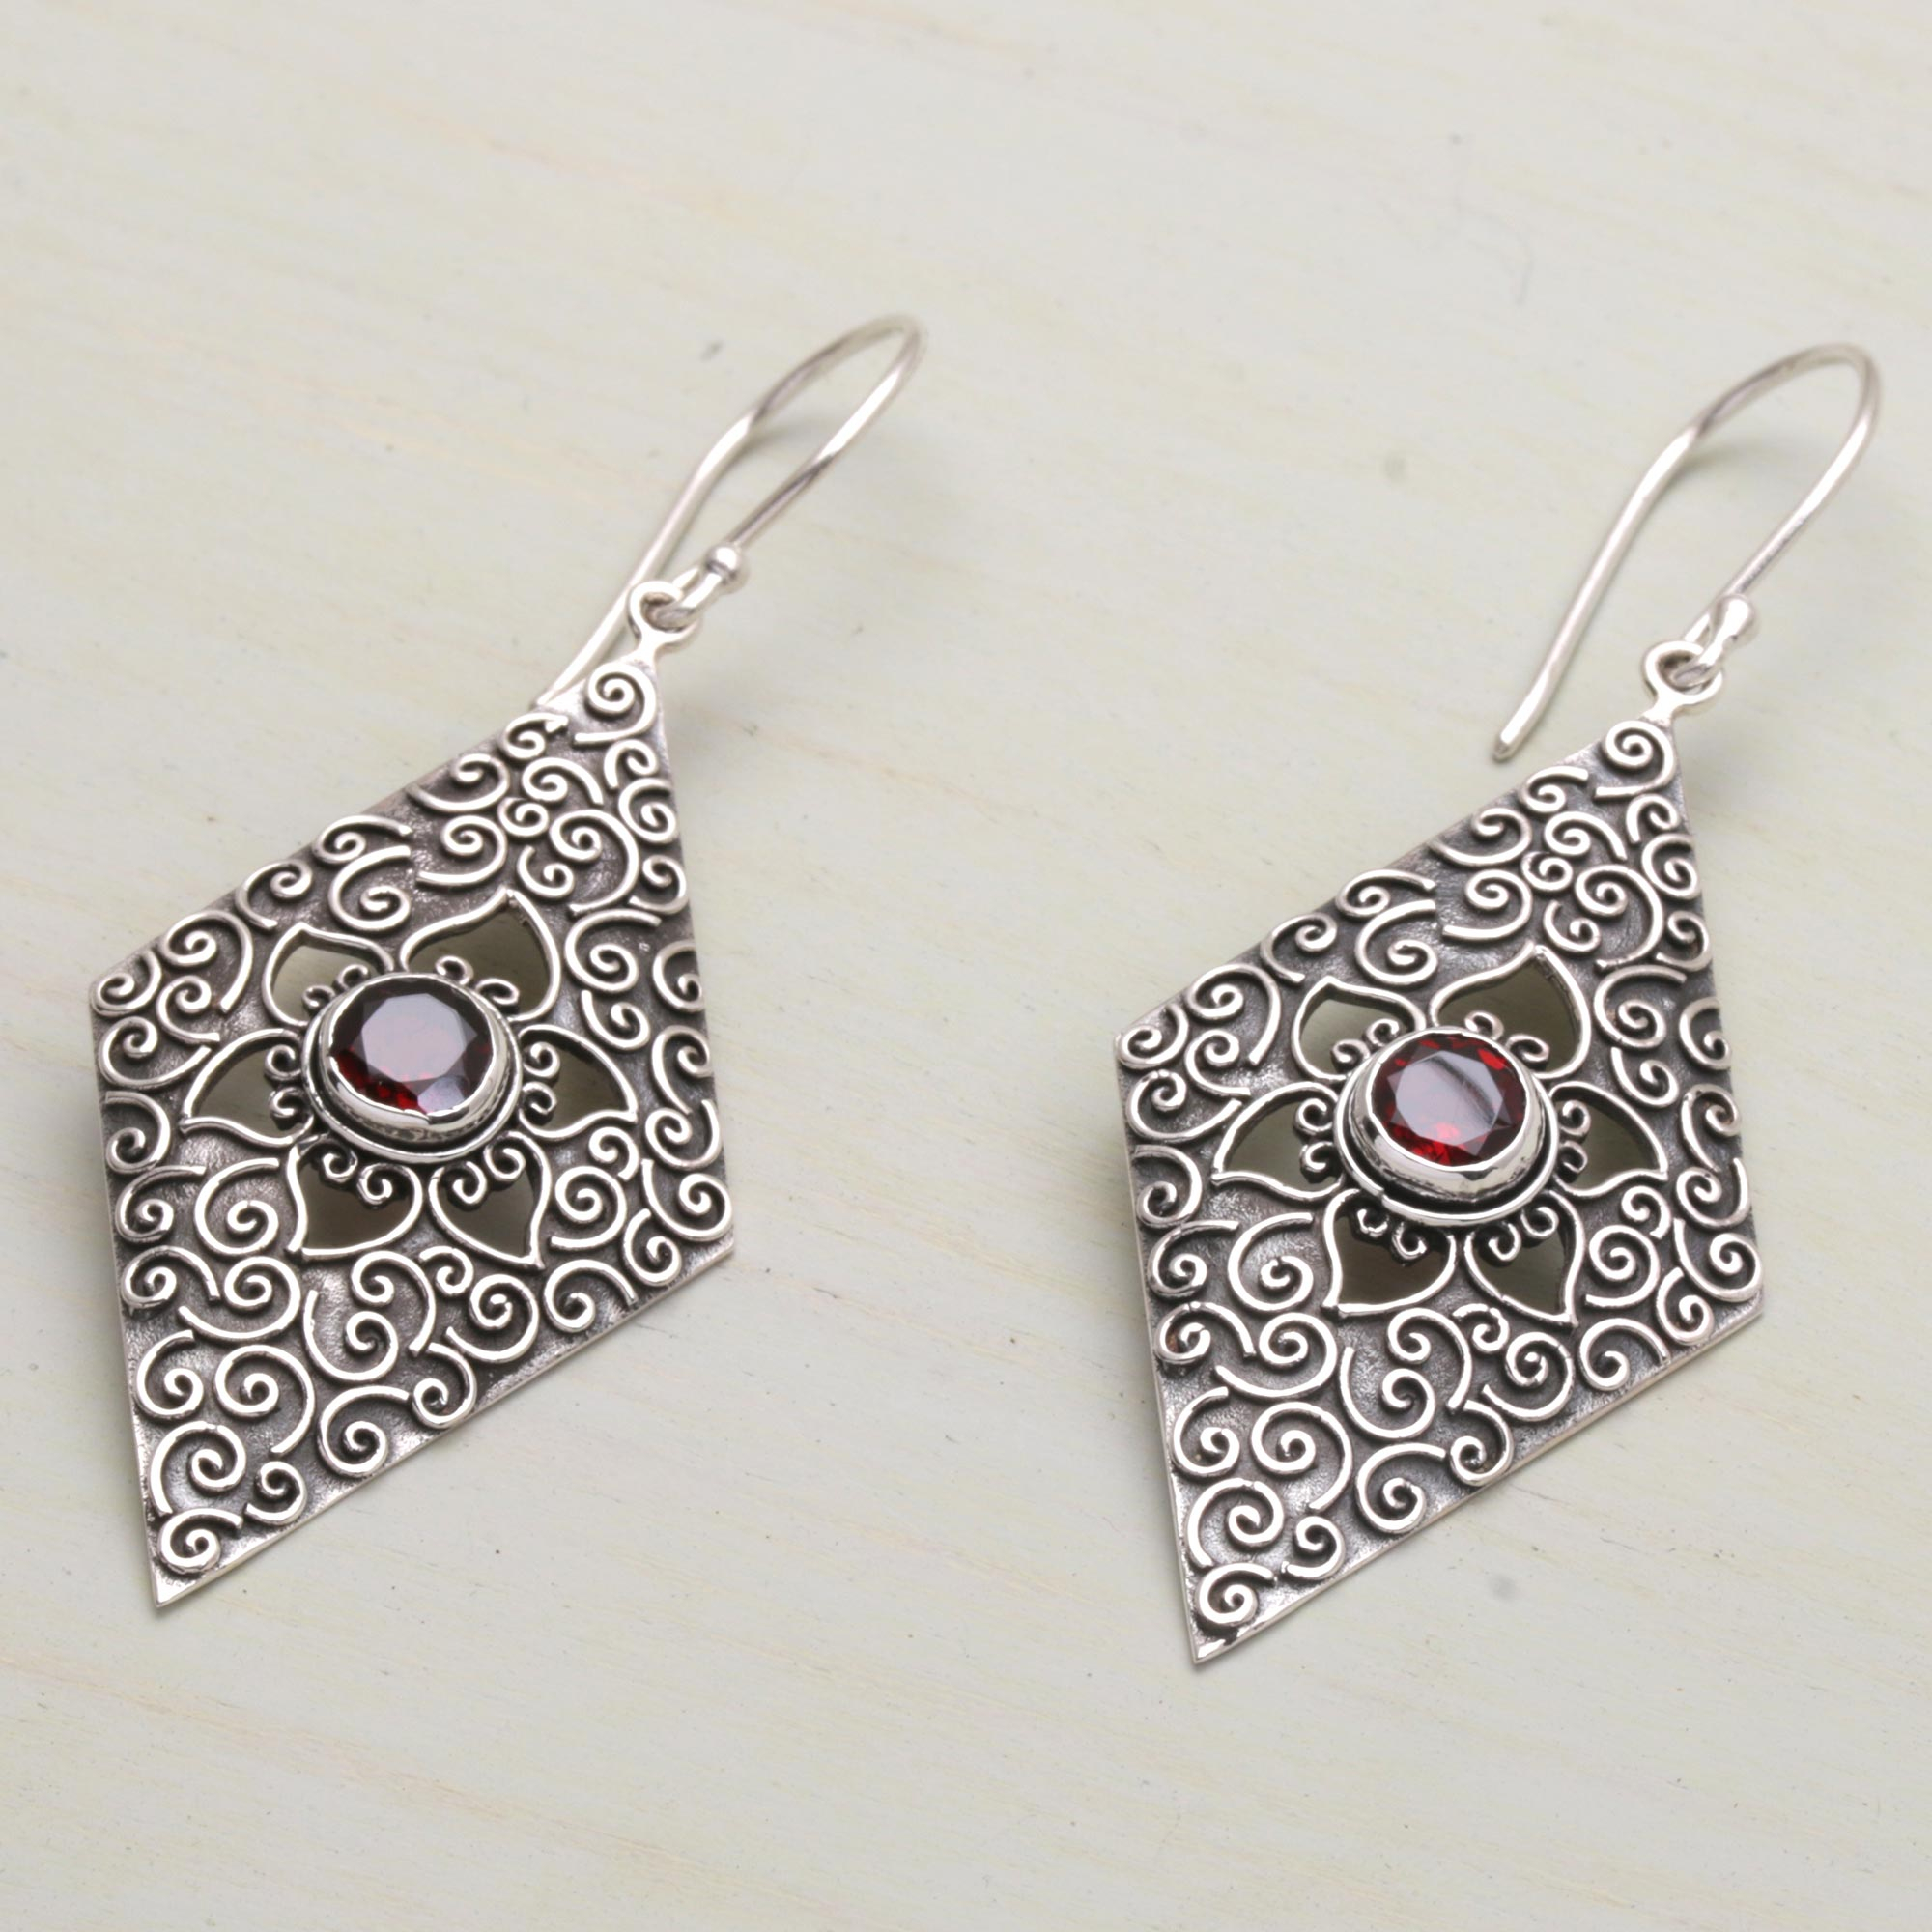 Garnet and Sterling Silver Floral Dangle Earrings from Bali - Daisy ...